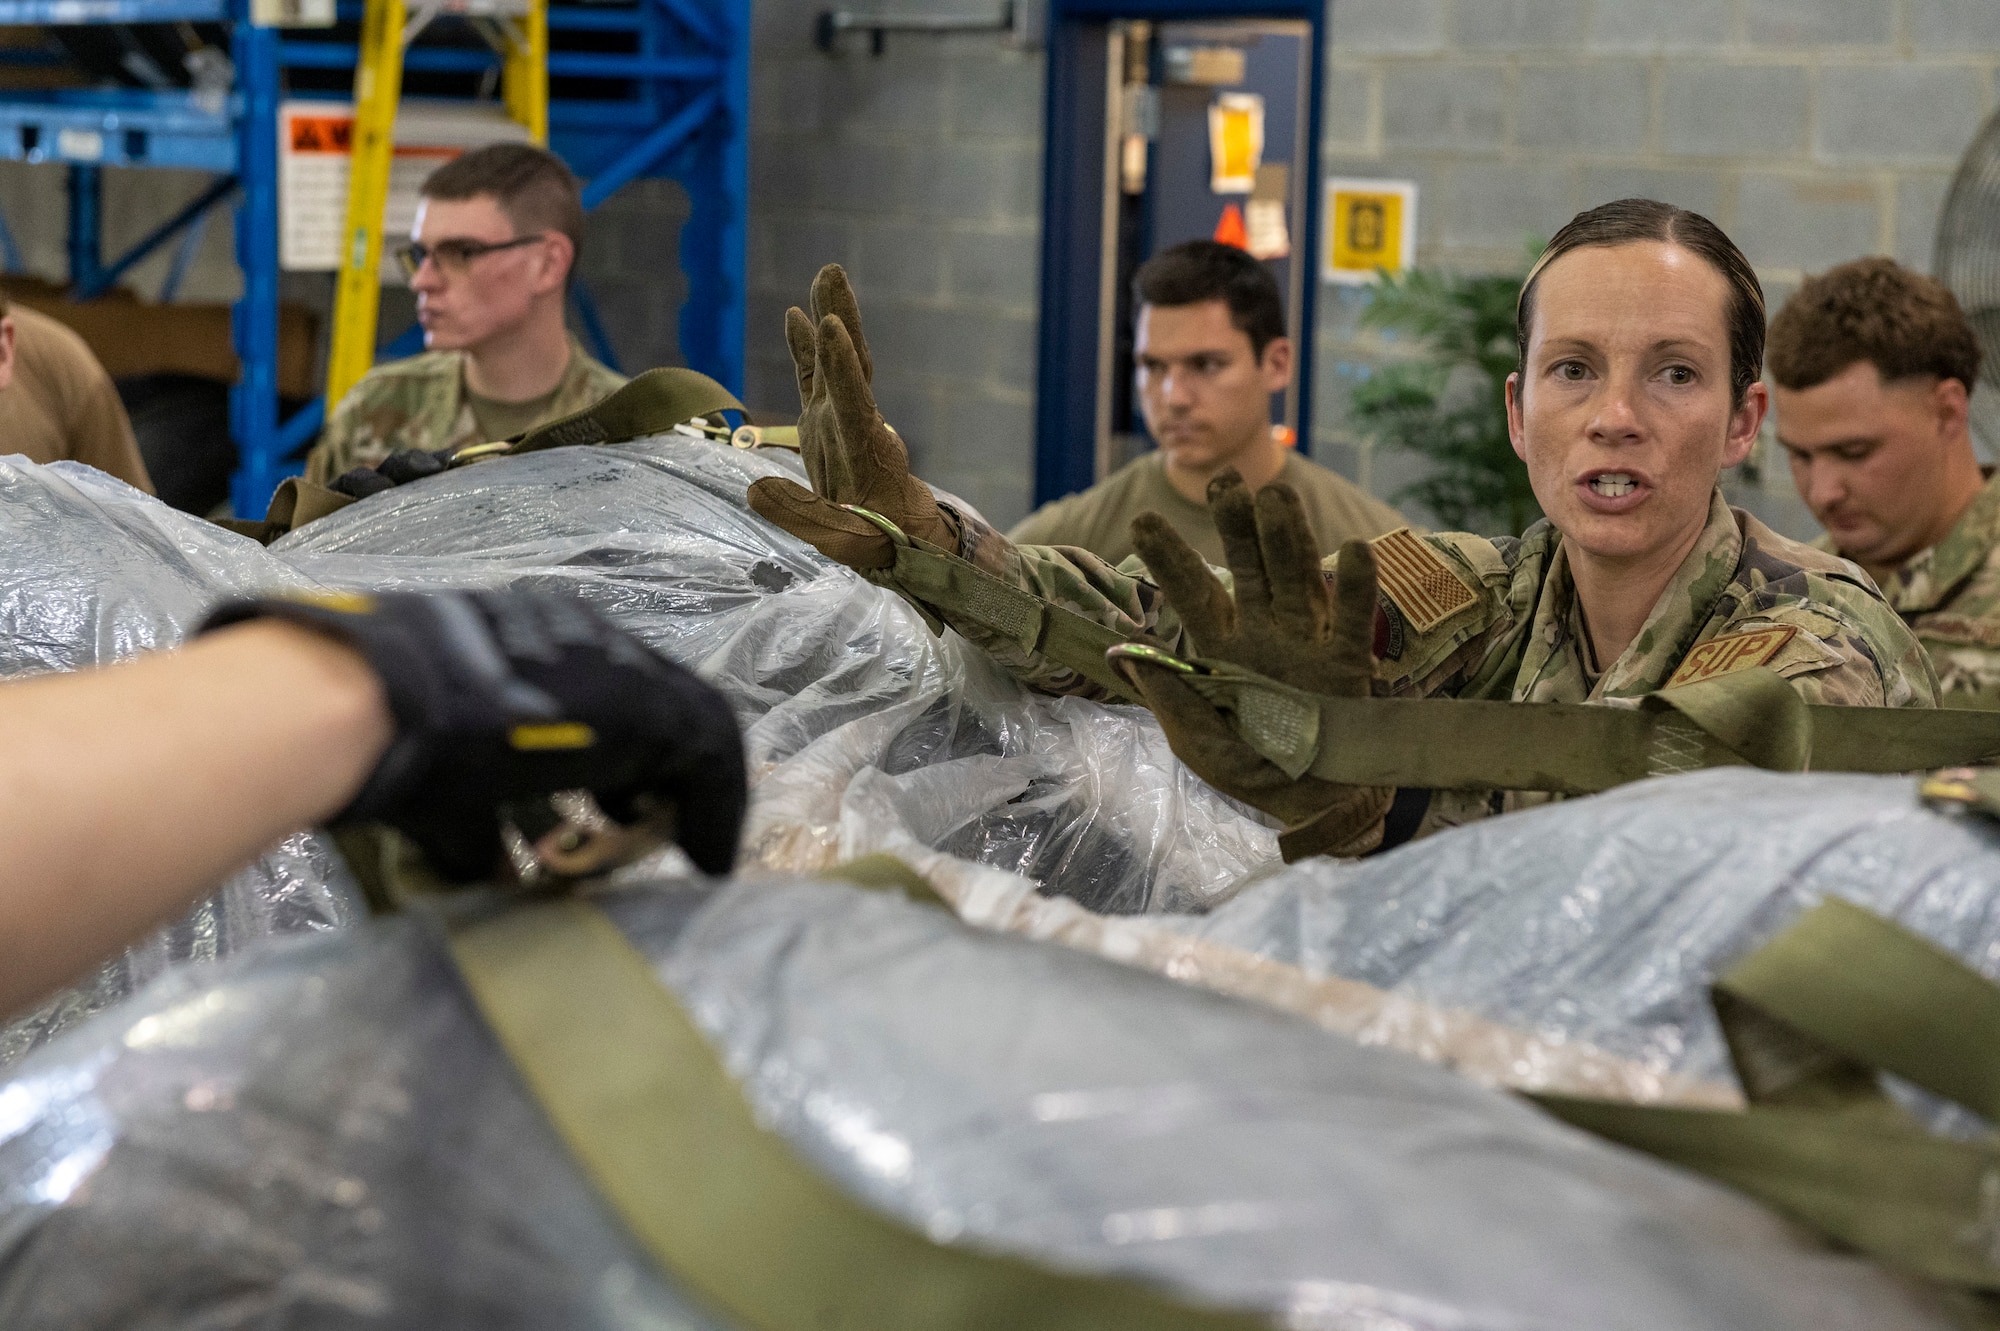 U.S. Air Force Staff Sgt. Summer Willson, a supply technician with 167th Logistics Readiness Squadron, secures a webbing strap during a pallet training event at the 167th Airlift Wing, Martinsburg, West Virginia, June 9, 2022. Building pallets like these are essential to quickly and safely load and unload U.S. Air Force cargo aircraft.